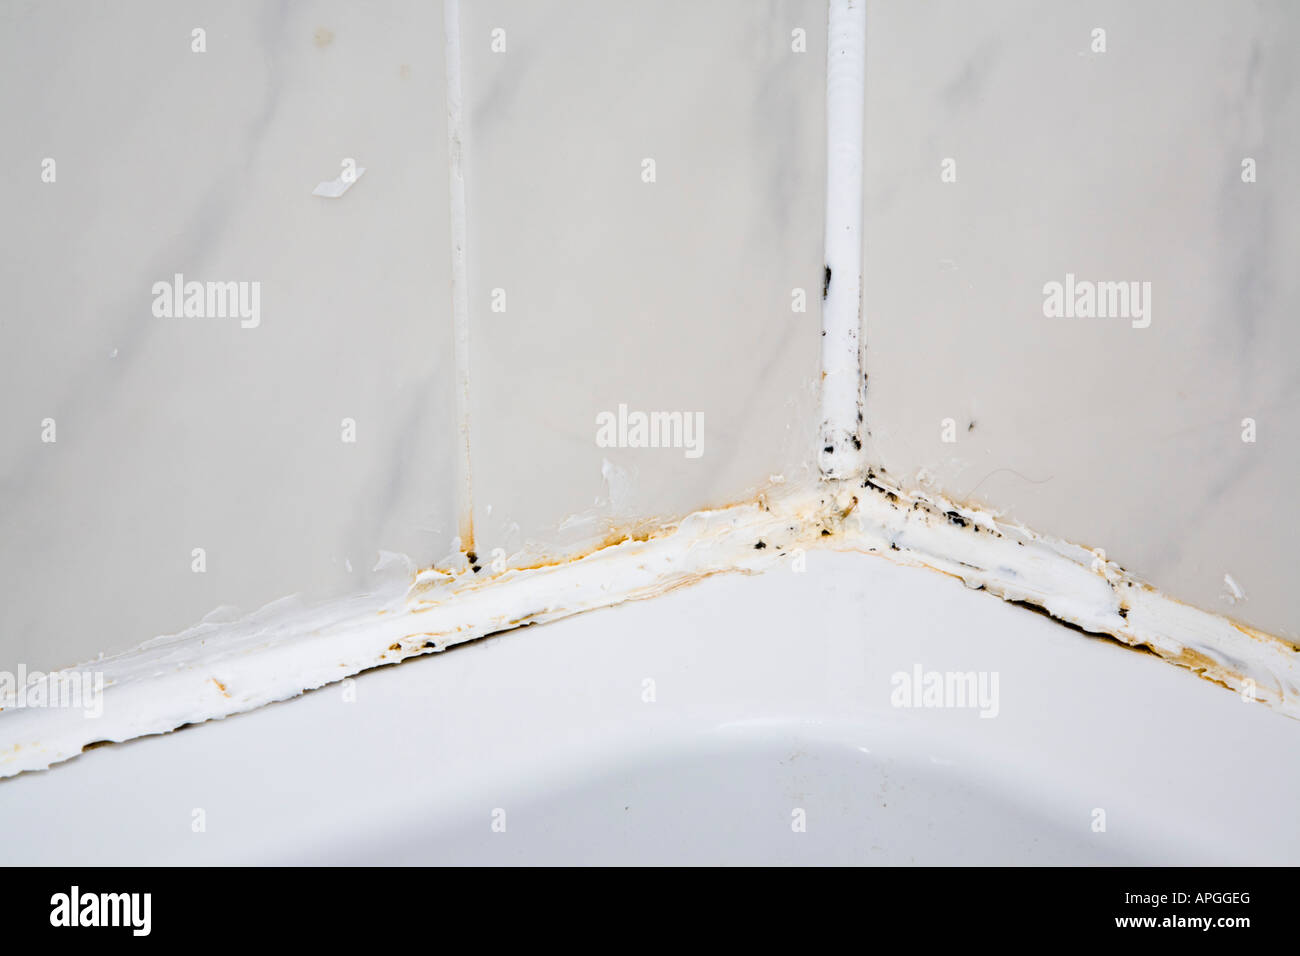 Britain UK Dirty white domestic bathroom shower cubicle base with black mould growing on peeling broken sealant and tile grout Stock Photo